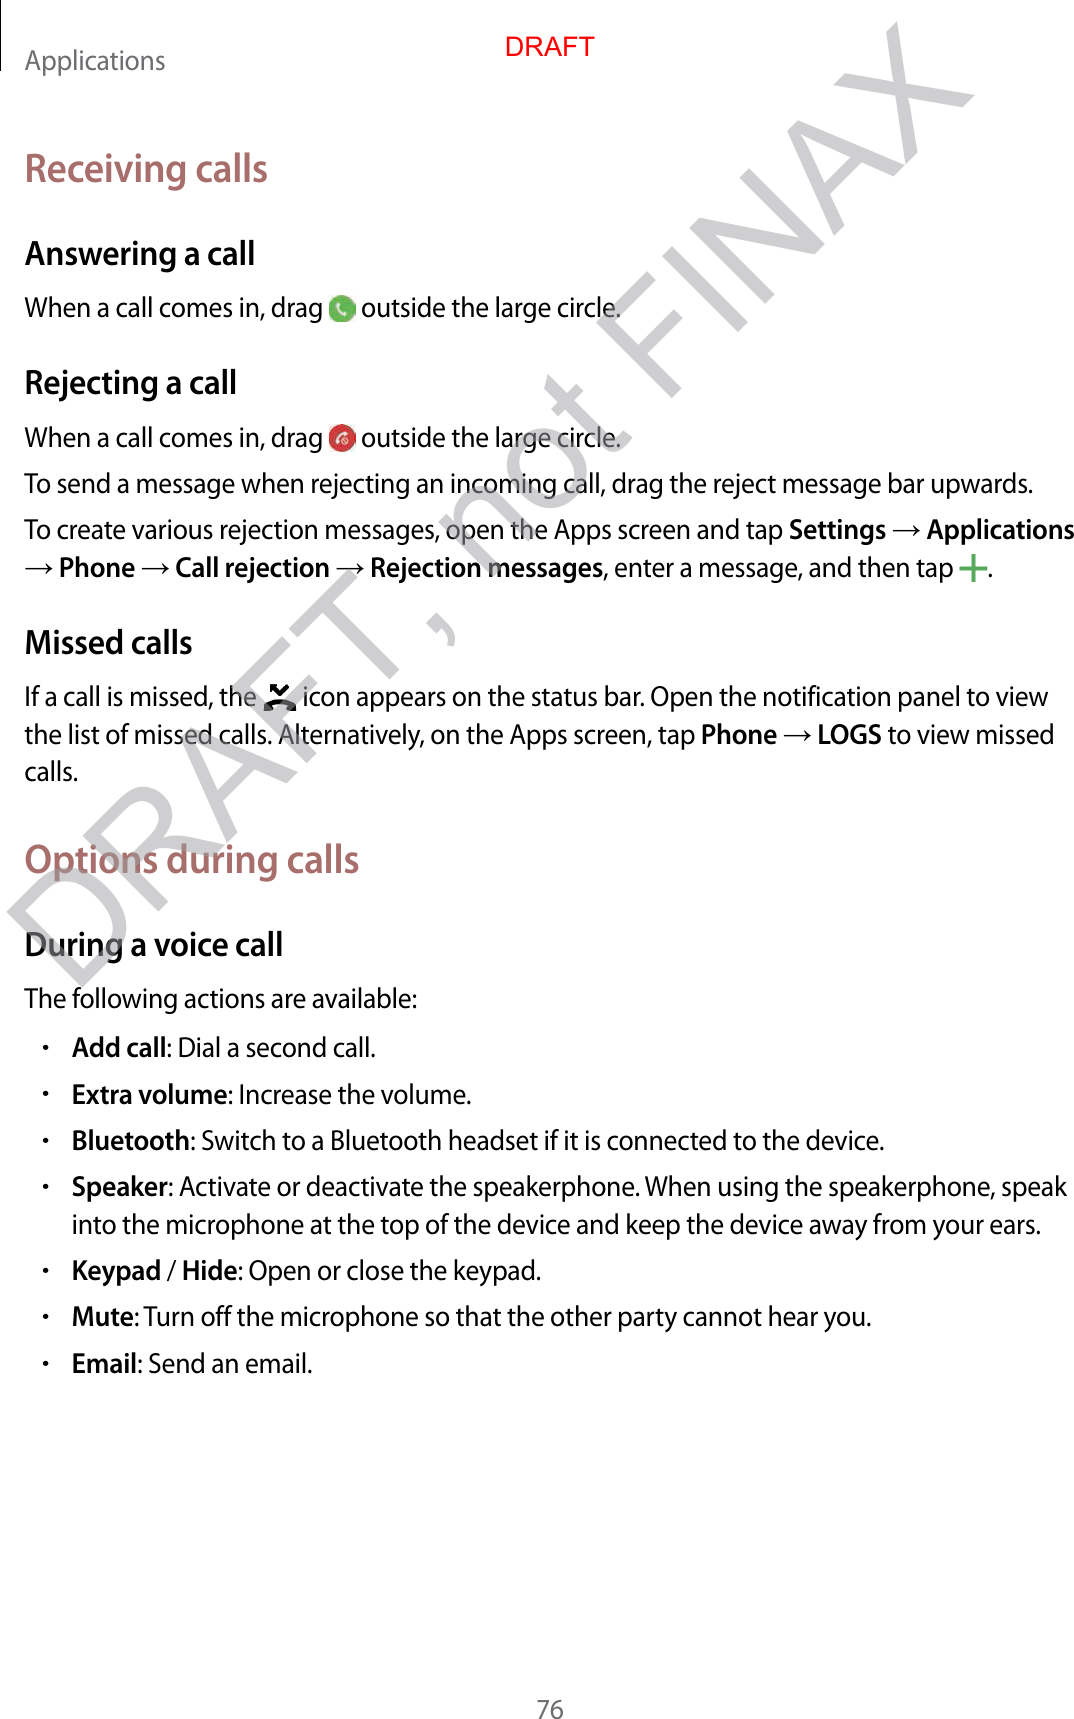 Applications76Receiving callsAnswering a callWhen a call comes in, drag   outside the large circle.Rejecting a callWhen a call comes in, drag   outside the large circle.To send a message when rejecting an incoming call, drag the reject message bar upwards.To create various rejection messages, open the Apps screen and tap Settings  Applications  Phone  Call rejection  Rejection messages, enter a message, and then tap  .Missed callsIf a call is missed, the   icon appears on the status bar. Open the notification panel to view the list of missed calls. Alternatively, on the Apps screen, tap Phone  LOGS to view missed calls.Options during callsDuring a voice callThe following actions are available:•Add call: Dial a second call.•Extra volume: Increase the volume.•Bluetooth: Switch to a Bluetooth headset if it is connected to the device.•Speaker: Activate or deactivate the speakerphone. When using the speakerphone, speak into the microphone at the top of the device and keep the device away from your ears.•Keypad / Hide: Open or close the keypad.•Mute: Turn off the microphone so that the other party cannot hear you.•Email: Send an email.DRAFTDRAFT, not FINAX